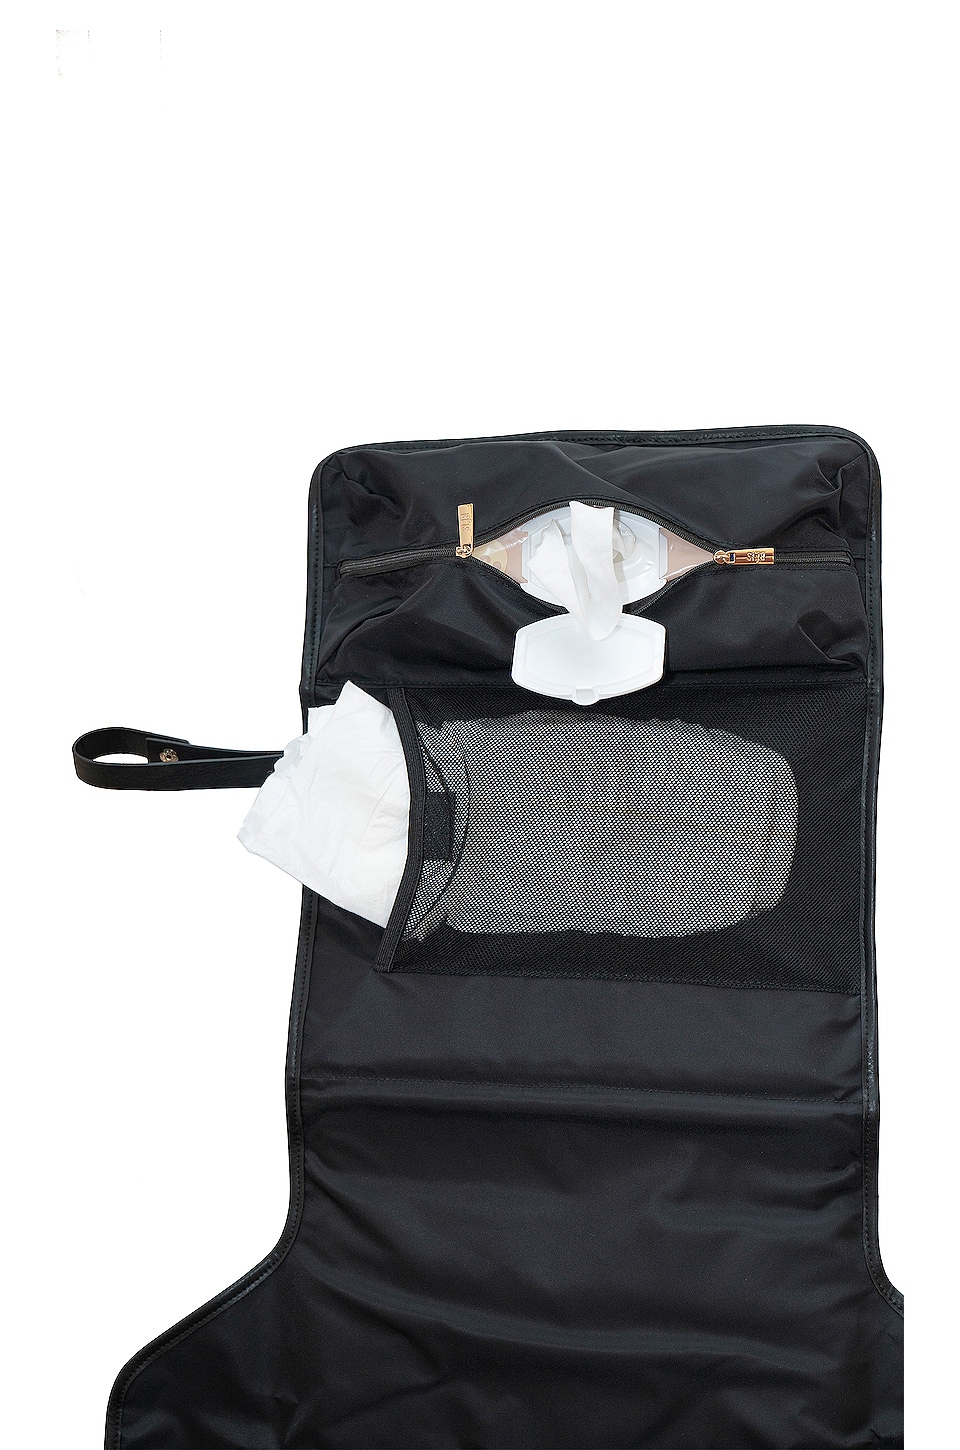 BEIS Travel Changing Pad in Black